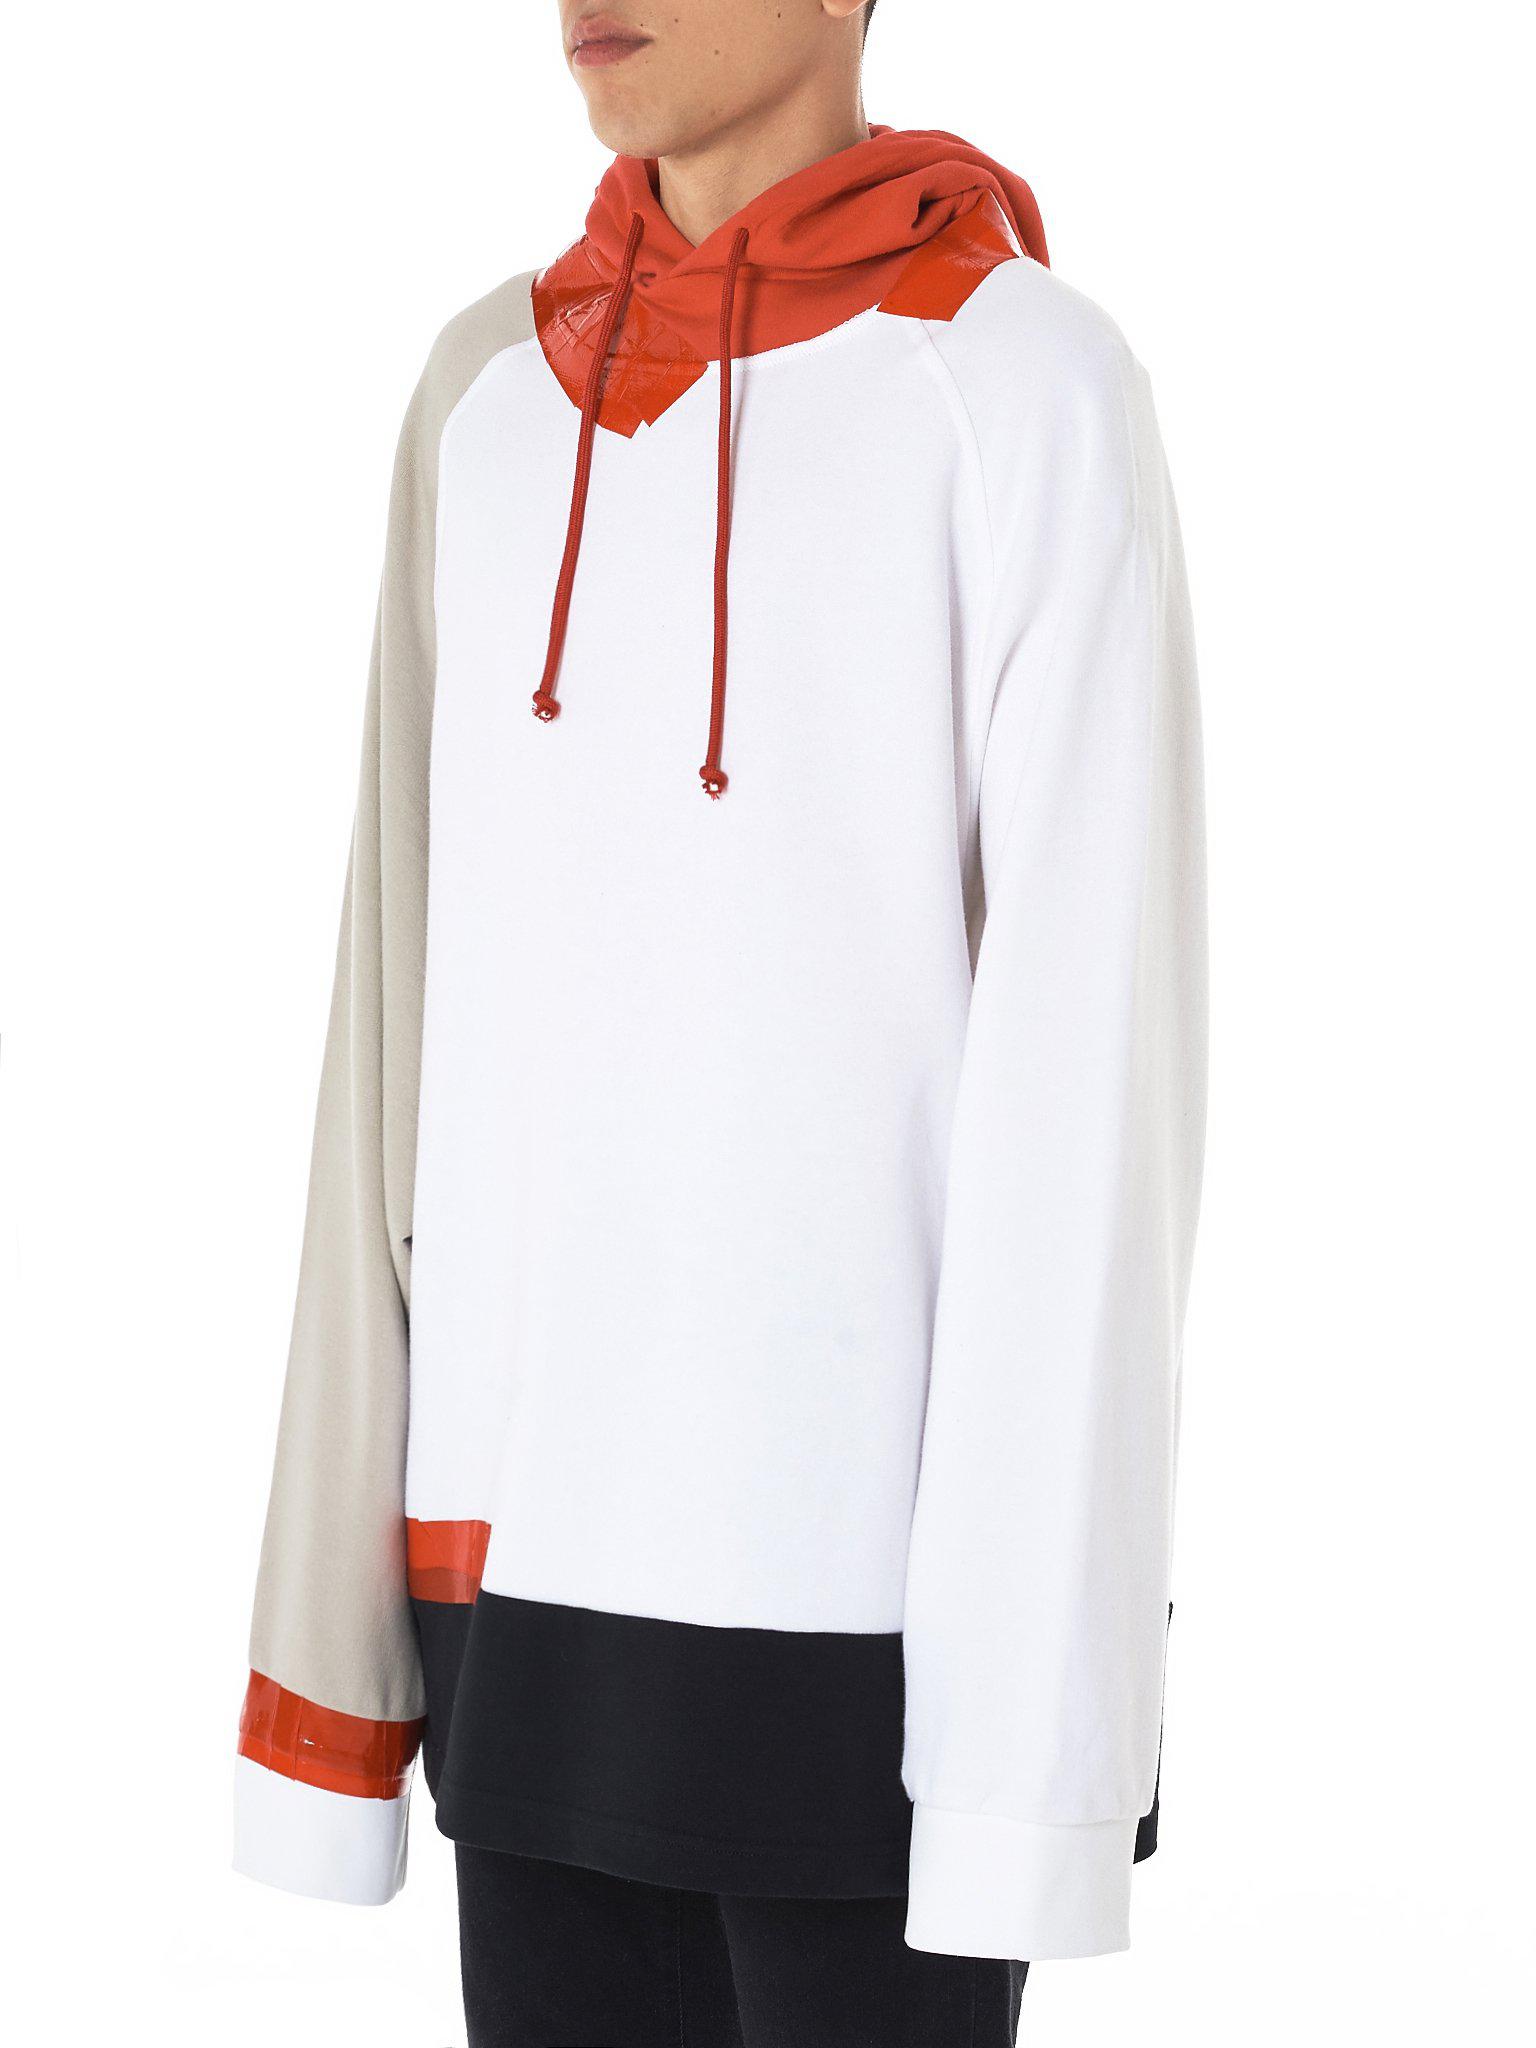 Lyst - Raf Simons Duct Tape Applique Assemblage Hoodie in White for Men